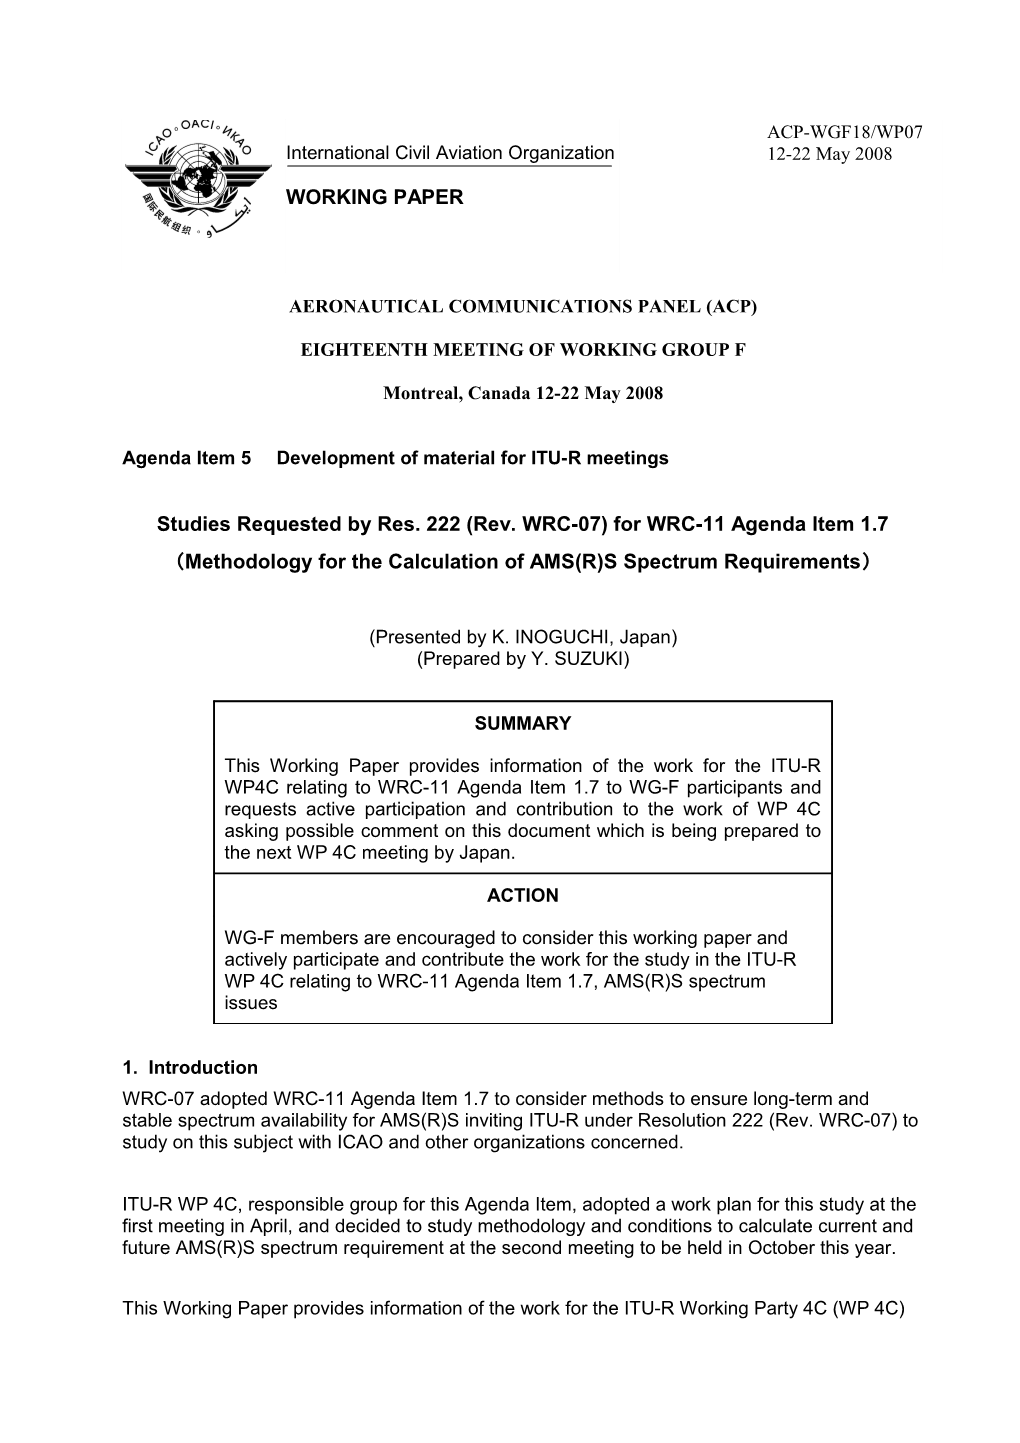 Studies Requested by Res. 222 (Rev. WRC-07) for WRC-11 Agenda Item 1.7 Methodology For